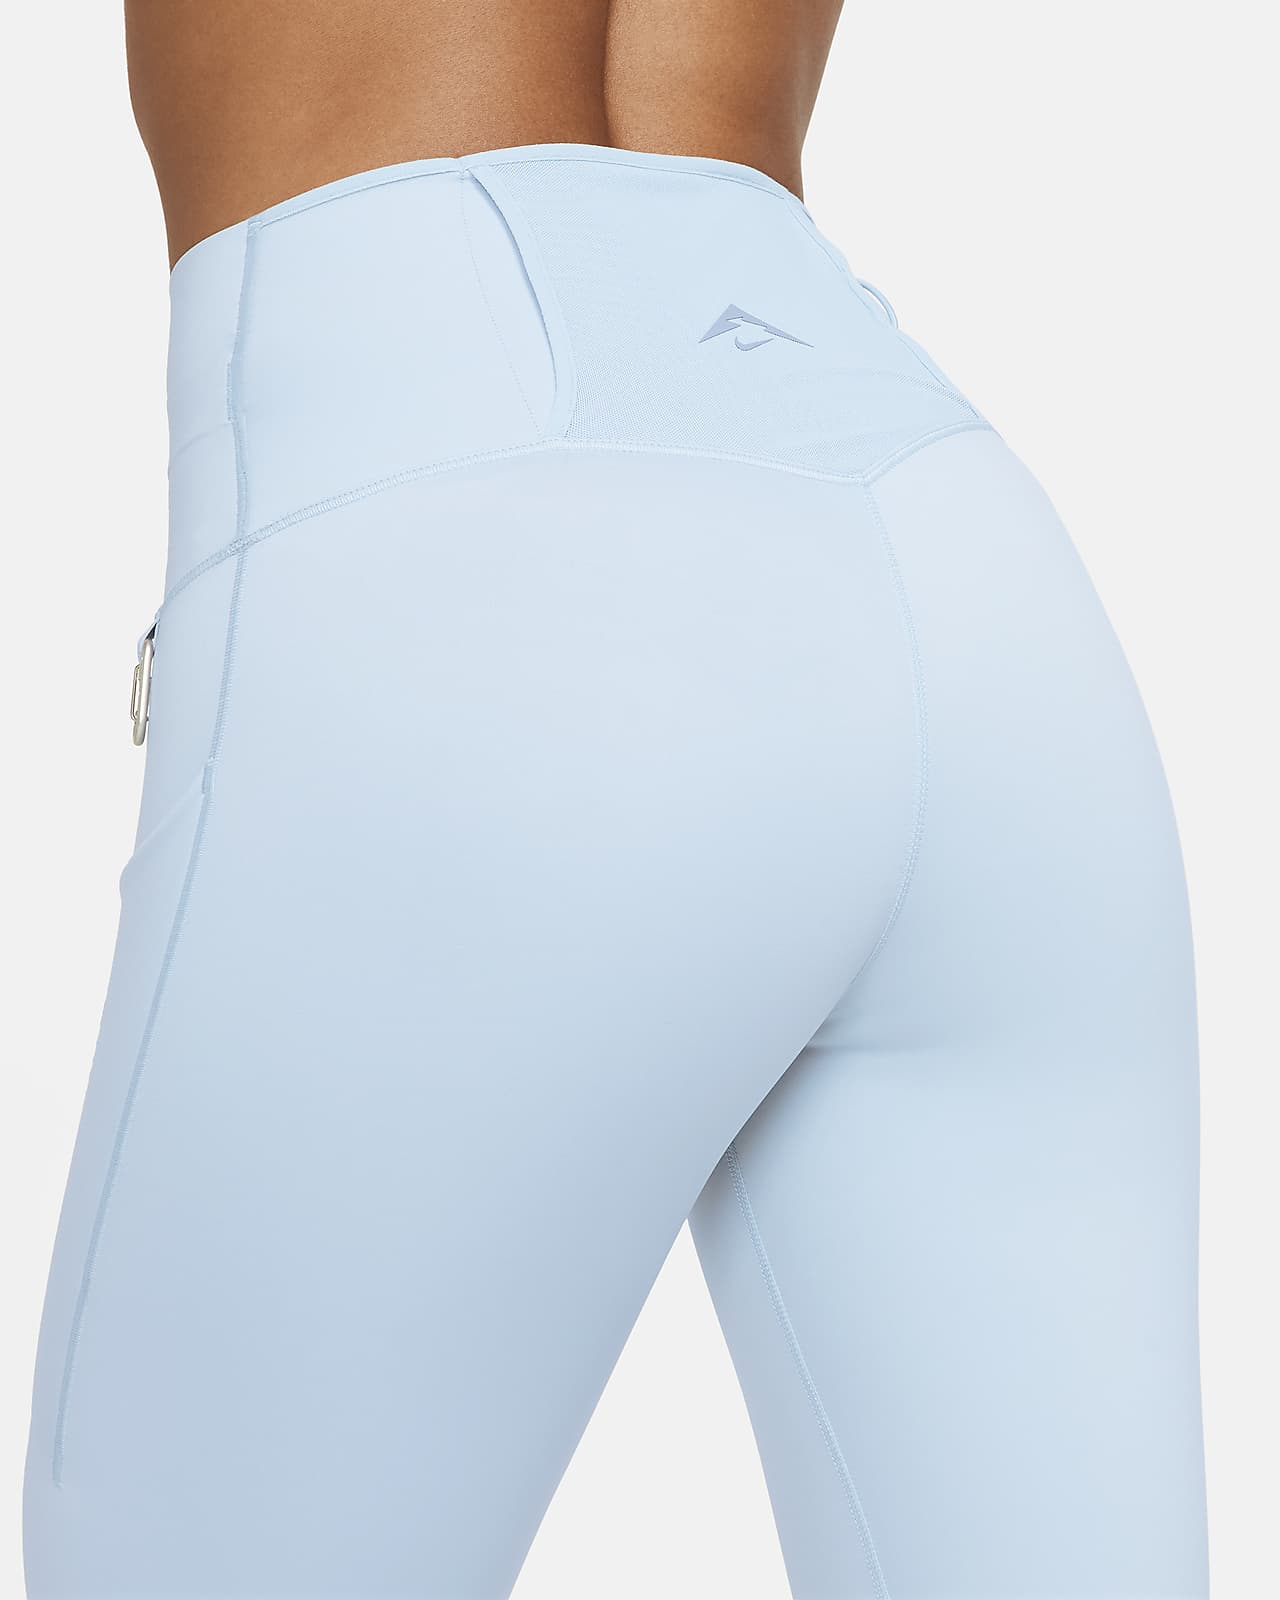 High-Waisted Training & Gym Trousers & Tights. Nike CA